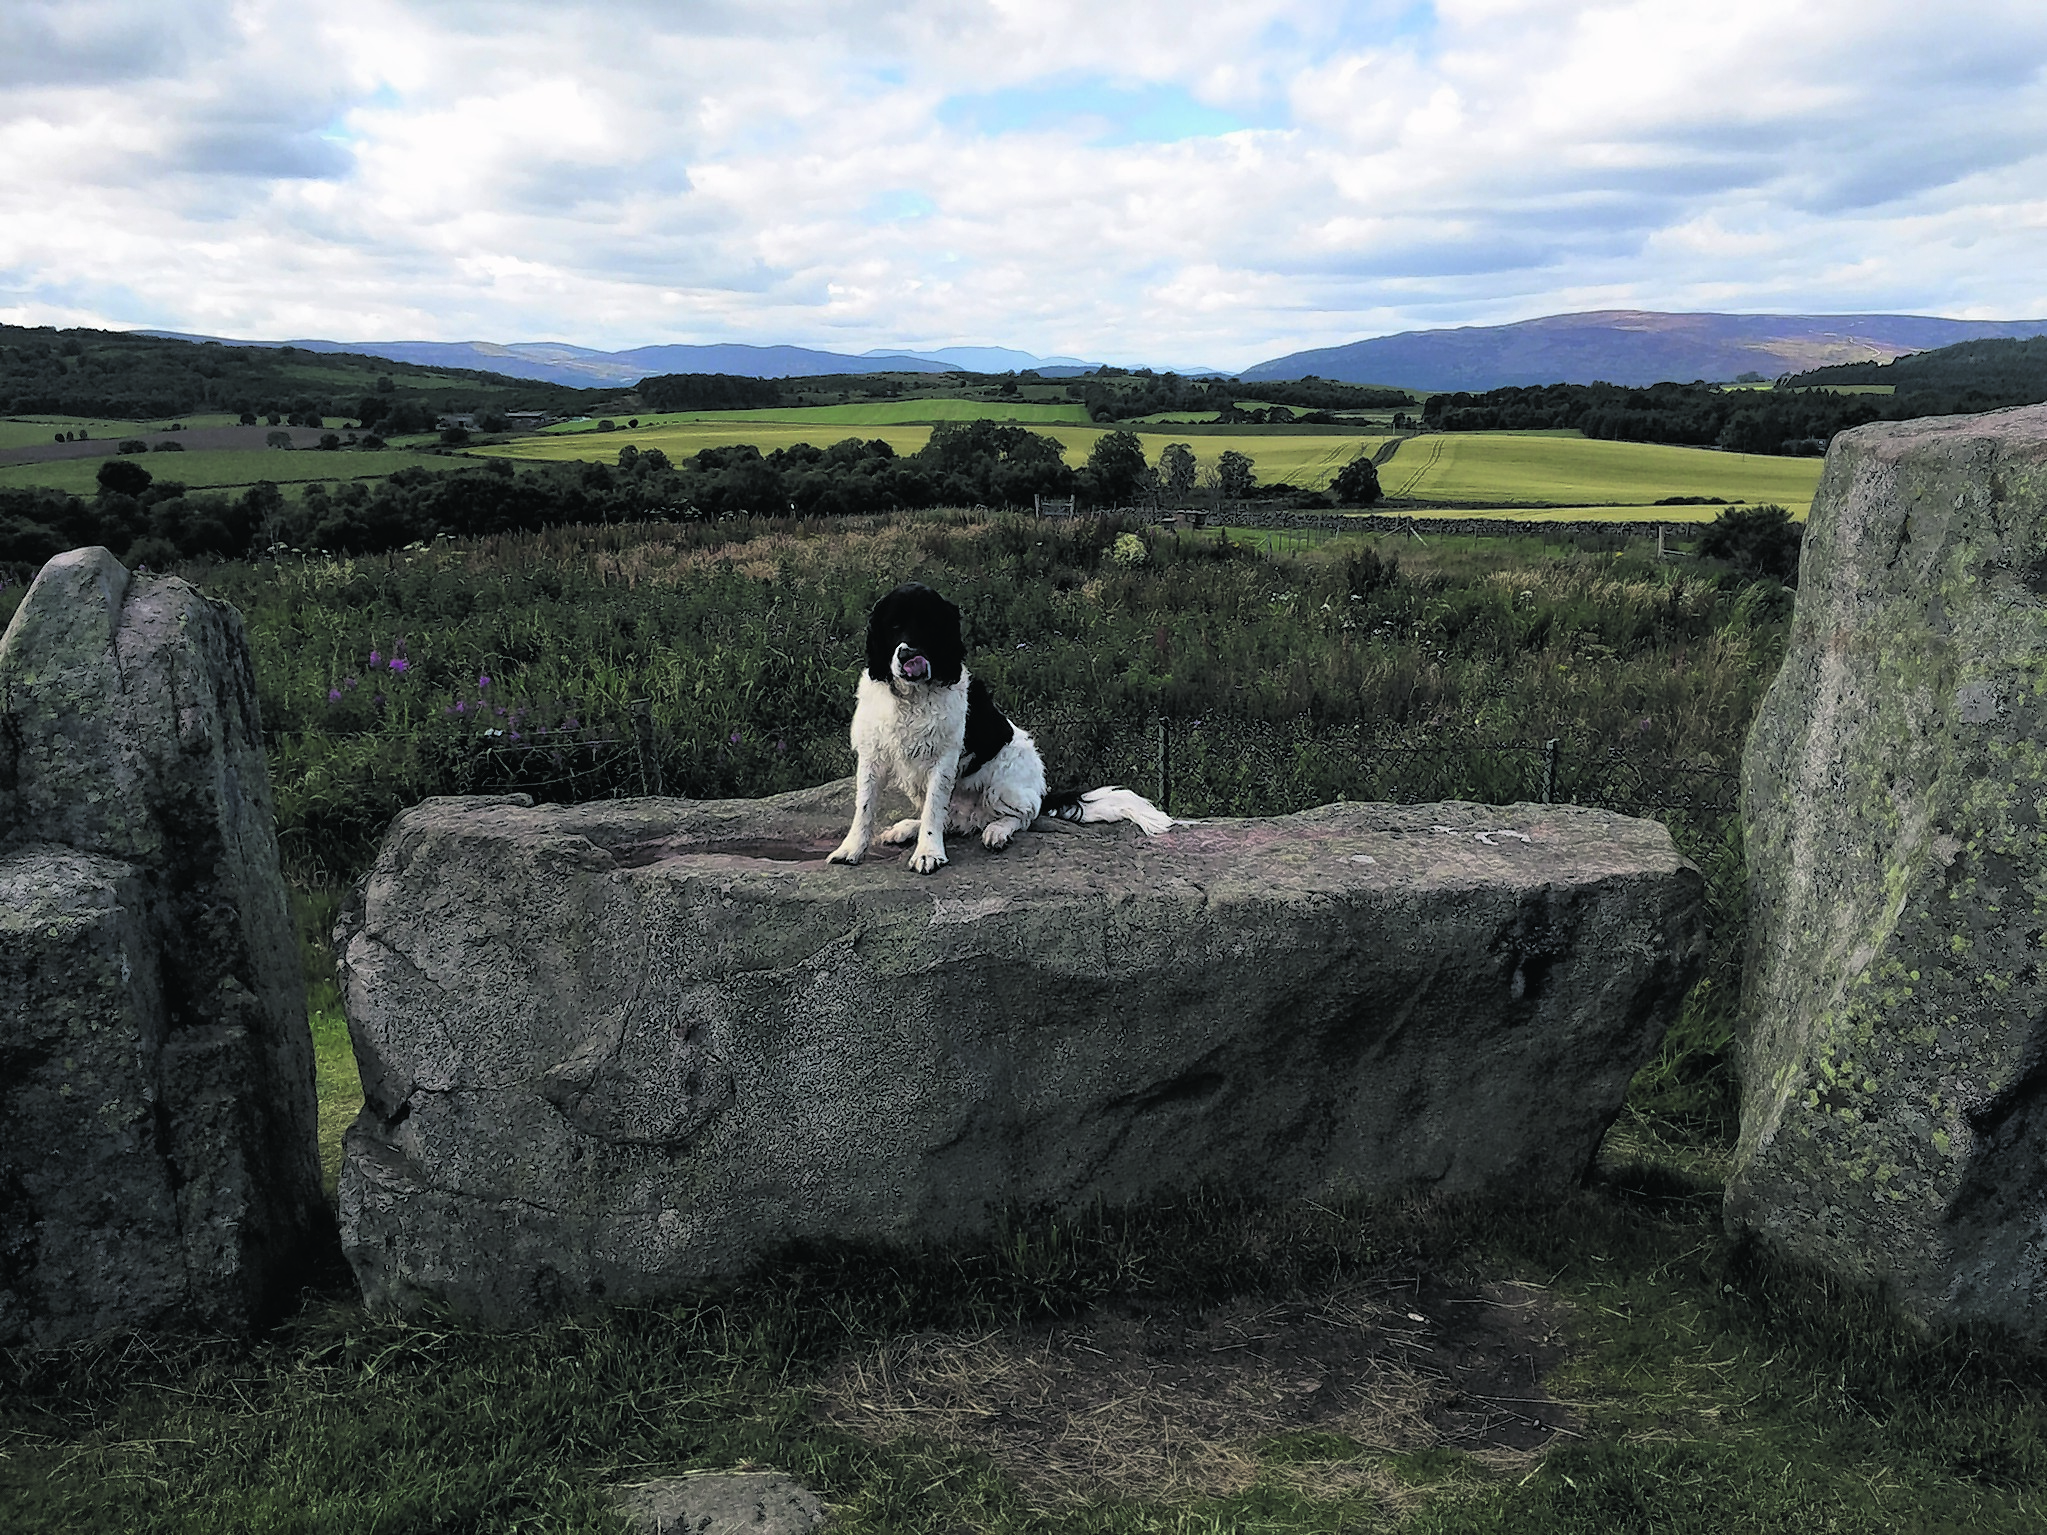 Abby from Drumoak at the standing stones outside Tarland with Lochnagar in the distance.